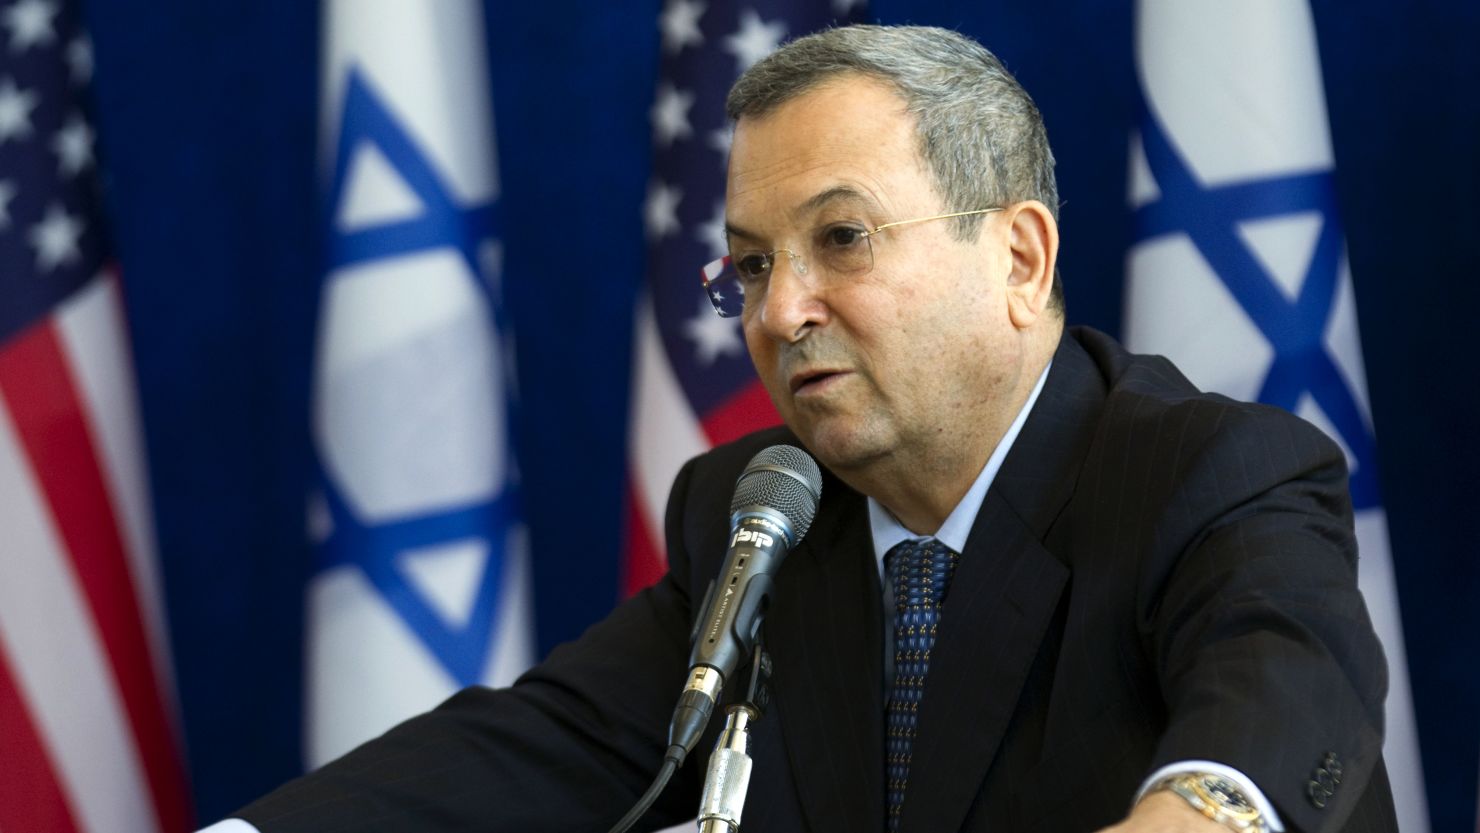 Israel's Defense Minister Ehud Barak said sanctions would force Iran to come to the negotiating table.